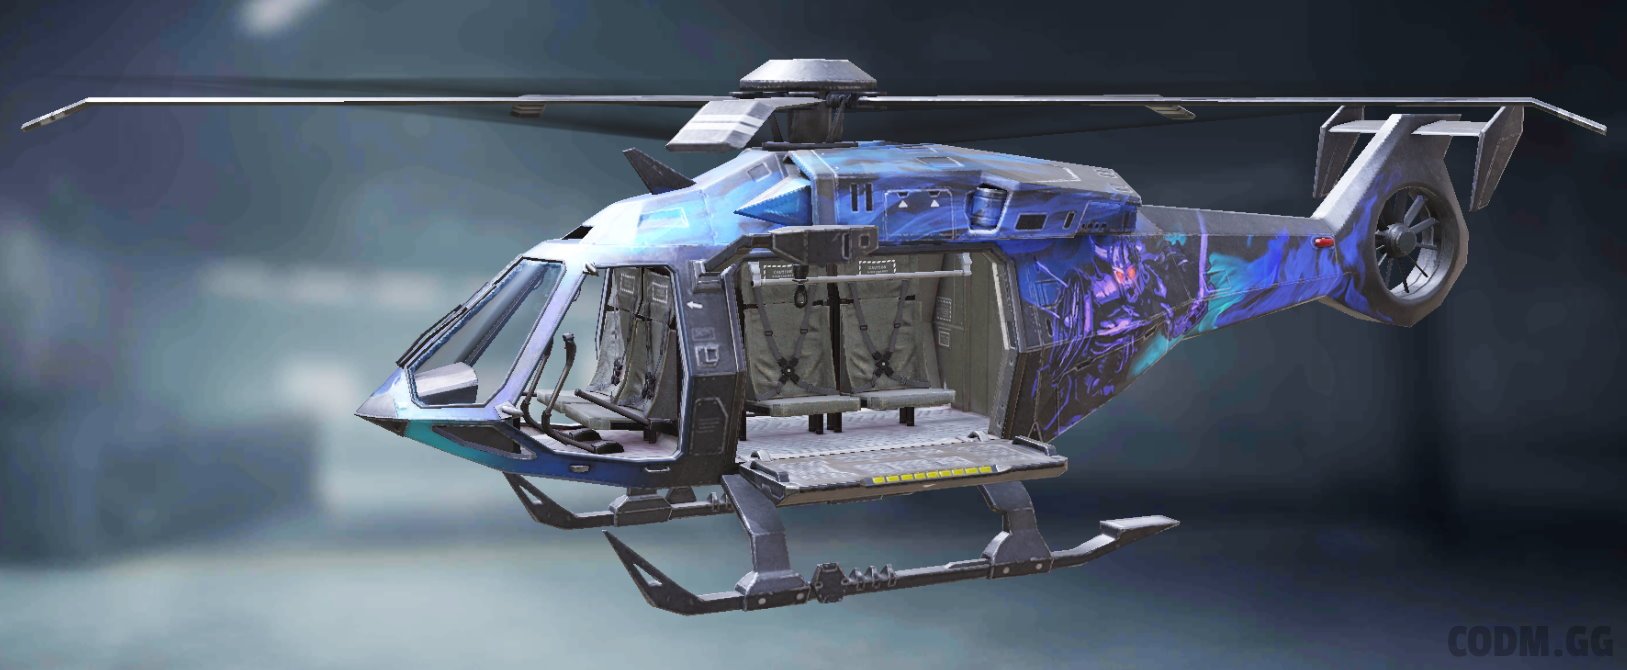 Helicopter Bad to the Bone, Epic camo in Call of Duty Mobile